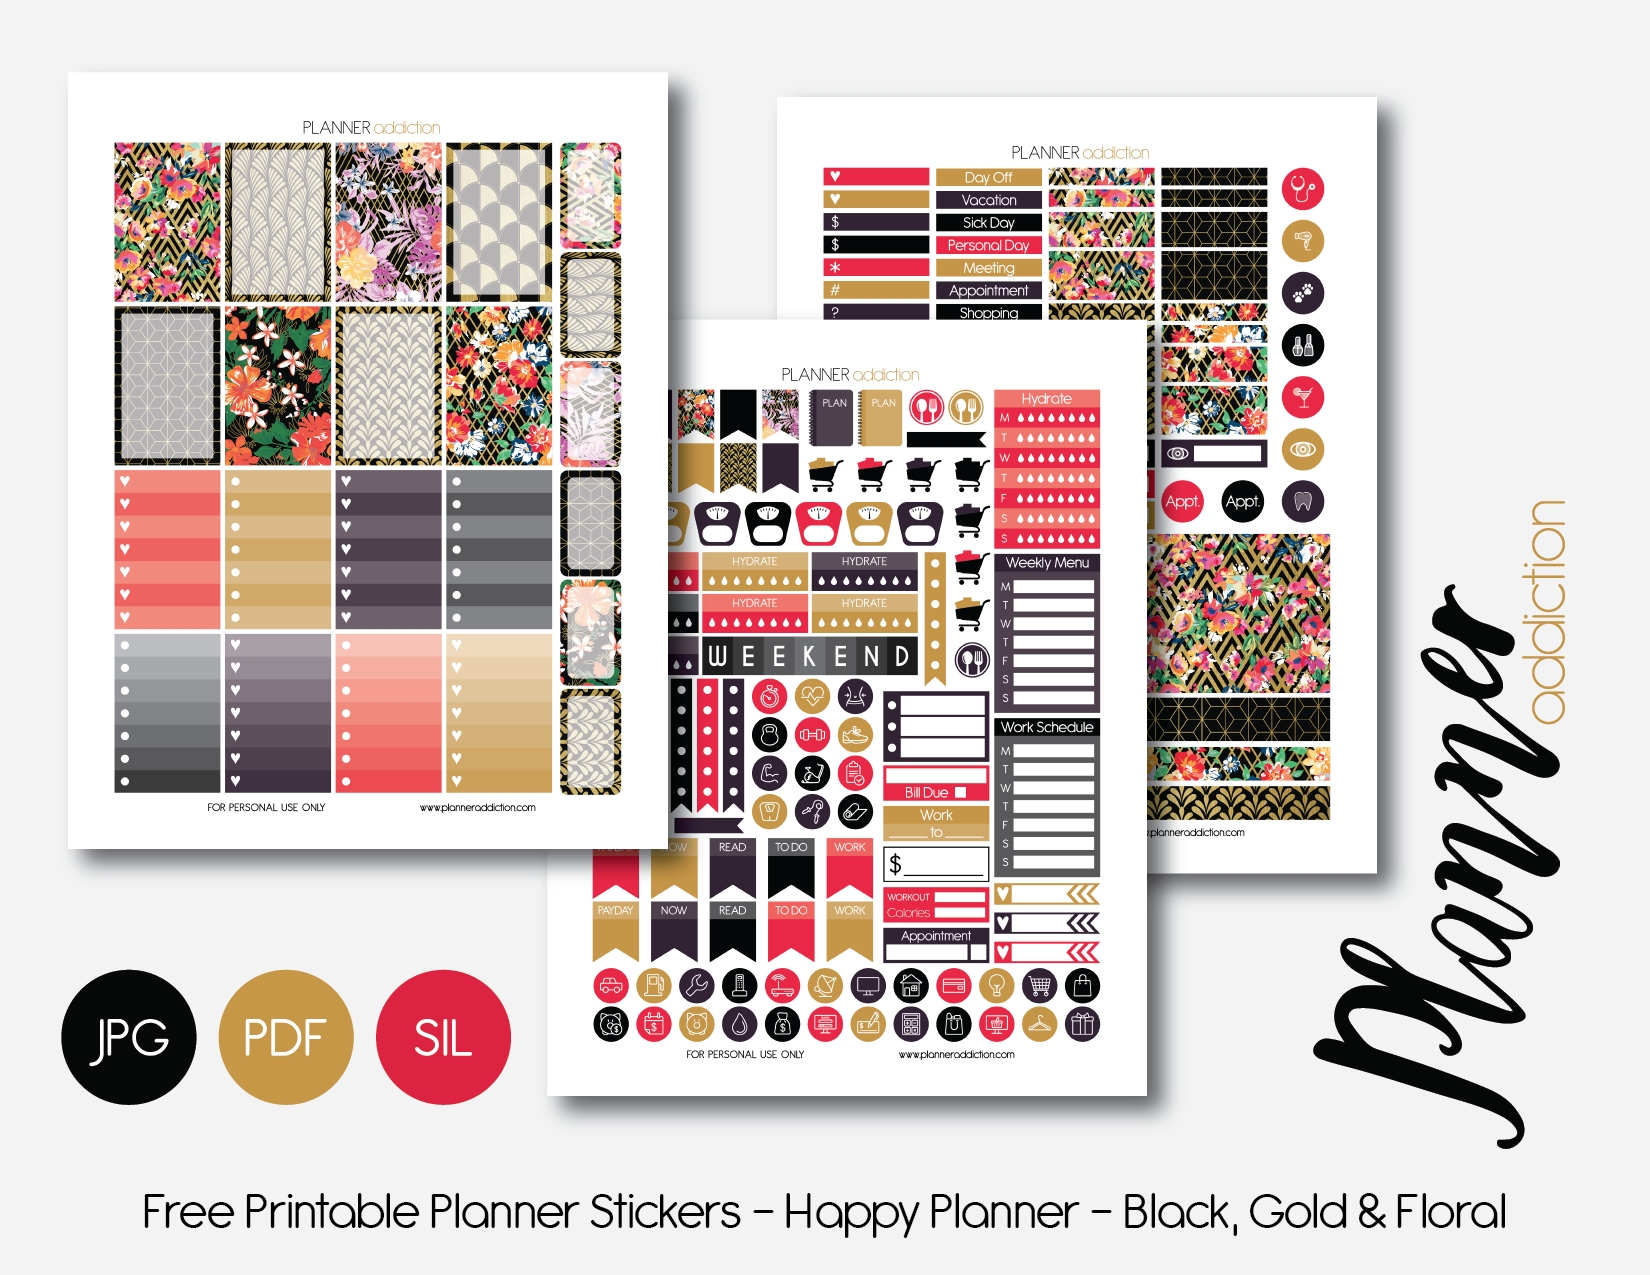 Free Printable Planner Stickers – Planner Addiction